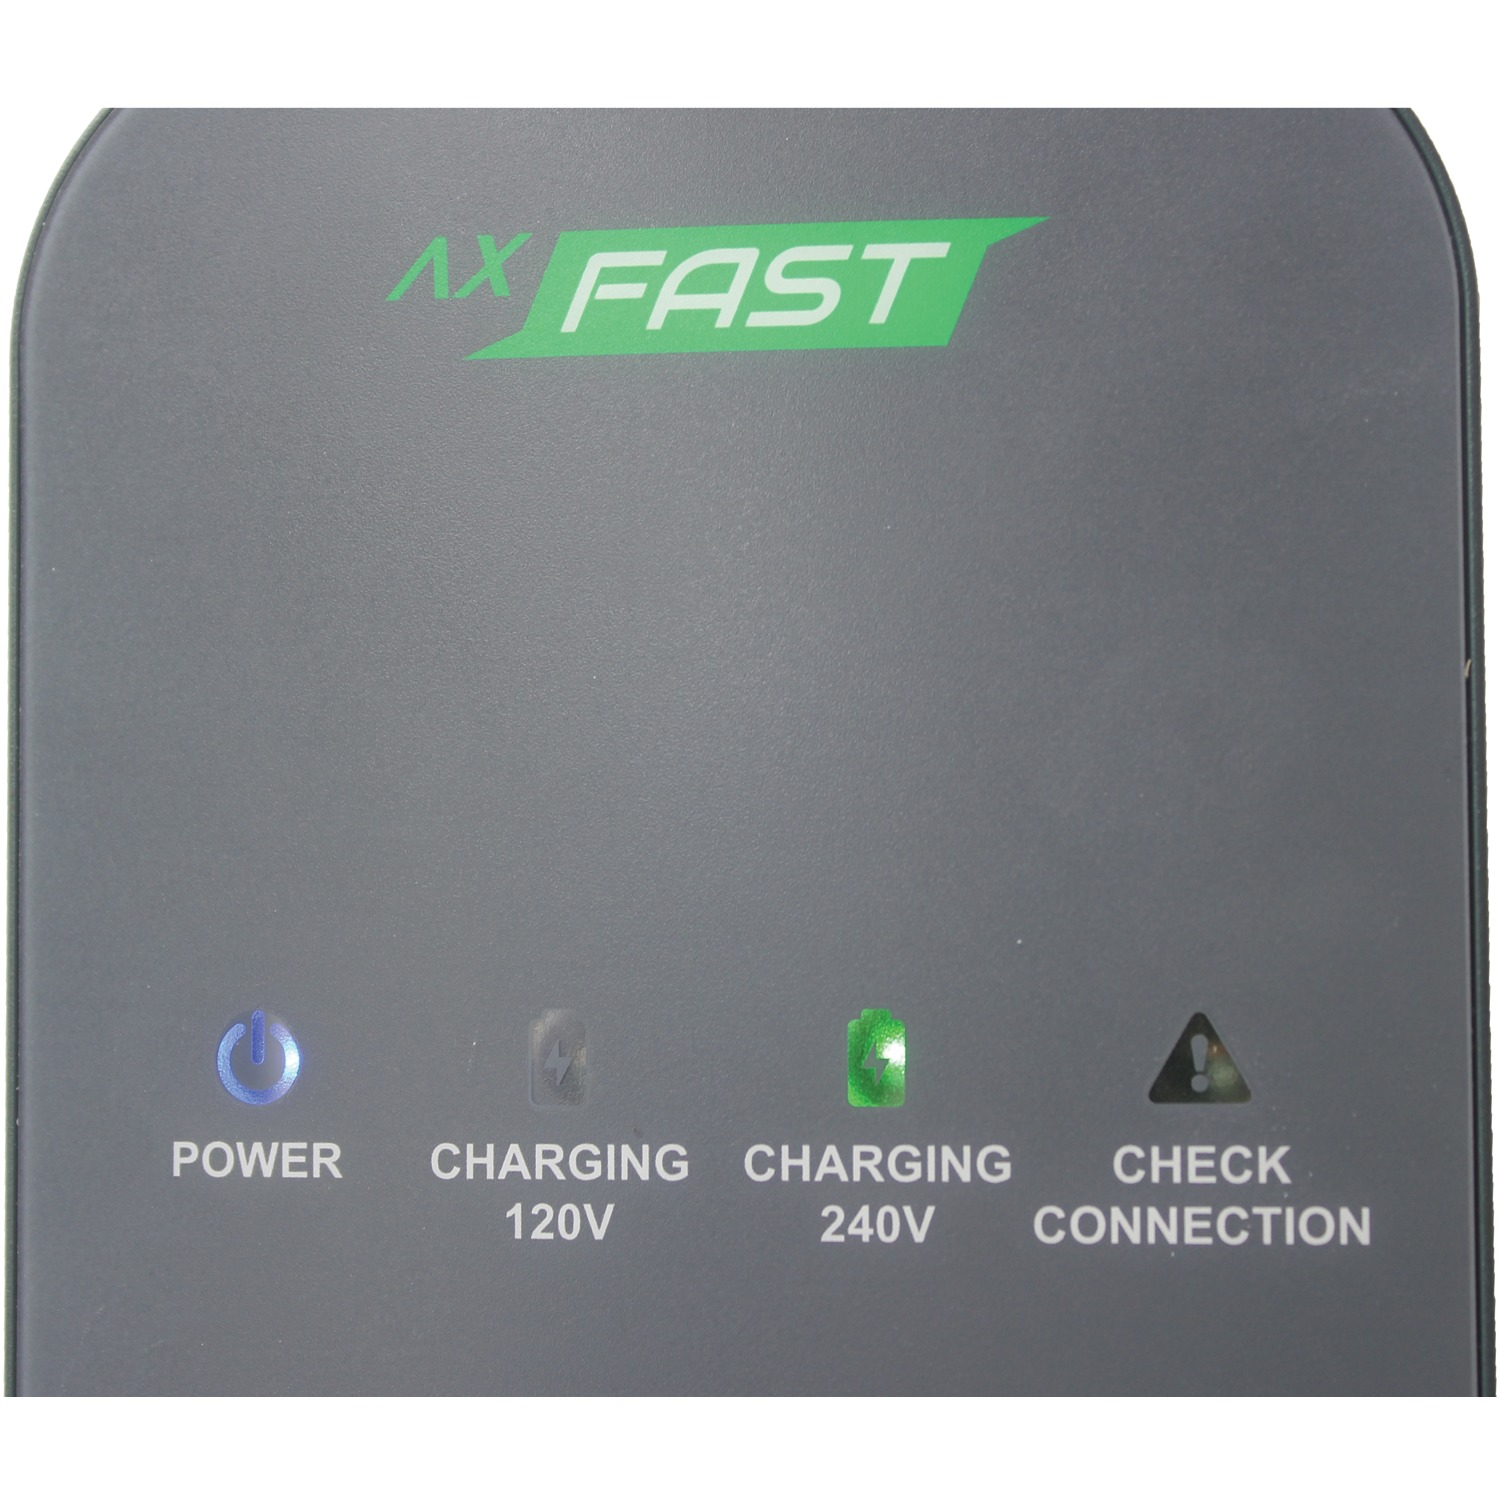 ACCELL P-120240V.USA-001 Dual-Voltage AxFAST Portable Electric Vehicle Charger (EVSE) Level 2 - image 4 of 7